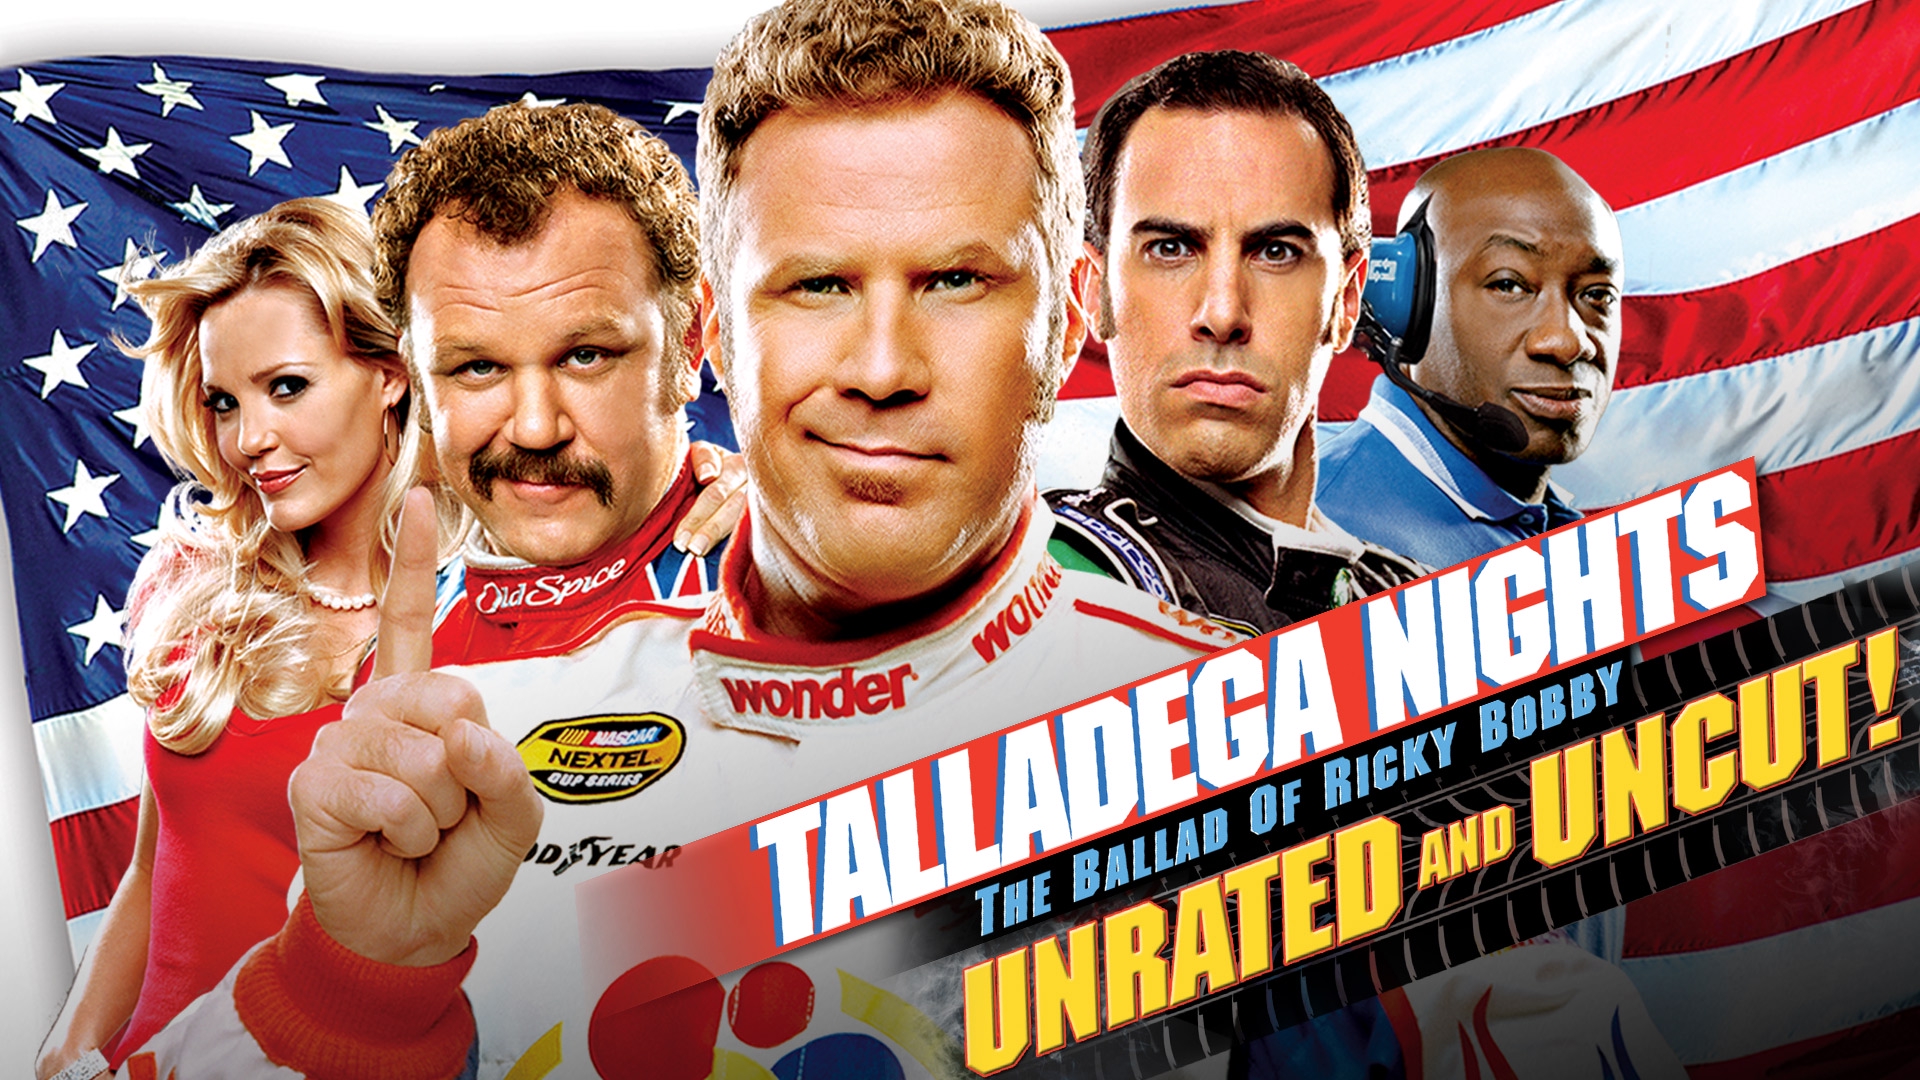 Stream Talladega Nights The Ballad of Ricky Bobby (Unrated and Uncut